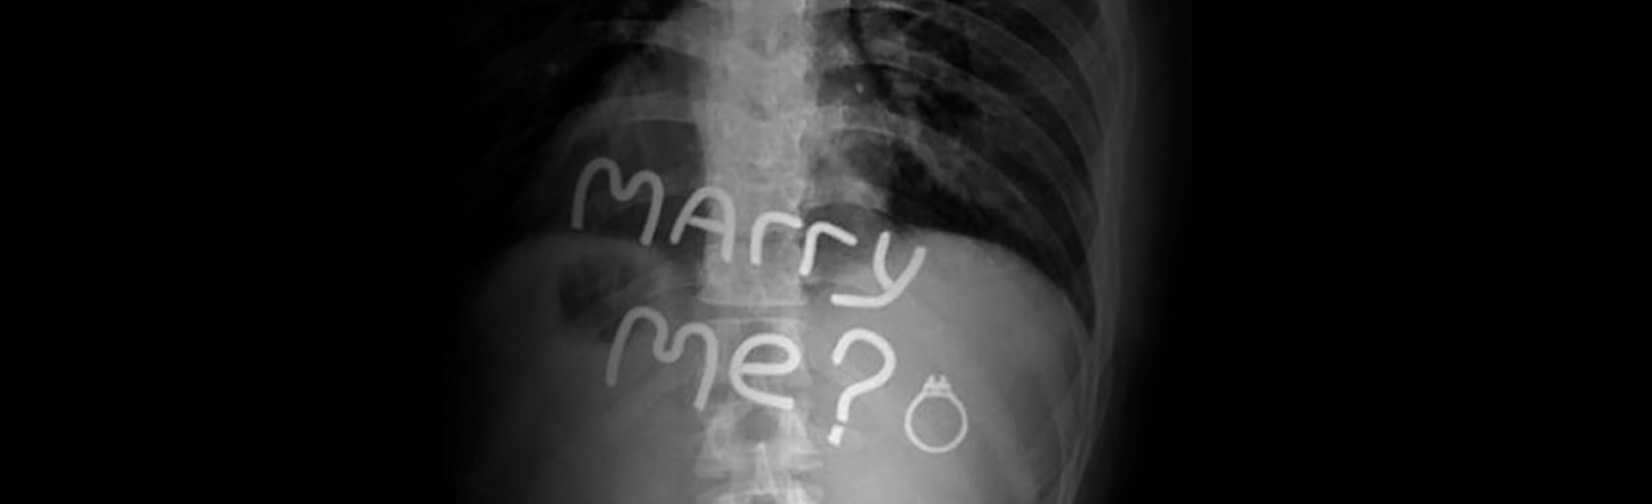 he went the medical clinic where his partner worked to get his back X-Rayed and DID THIS